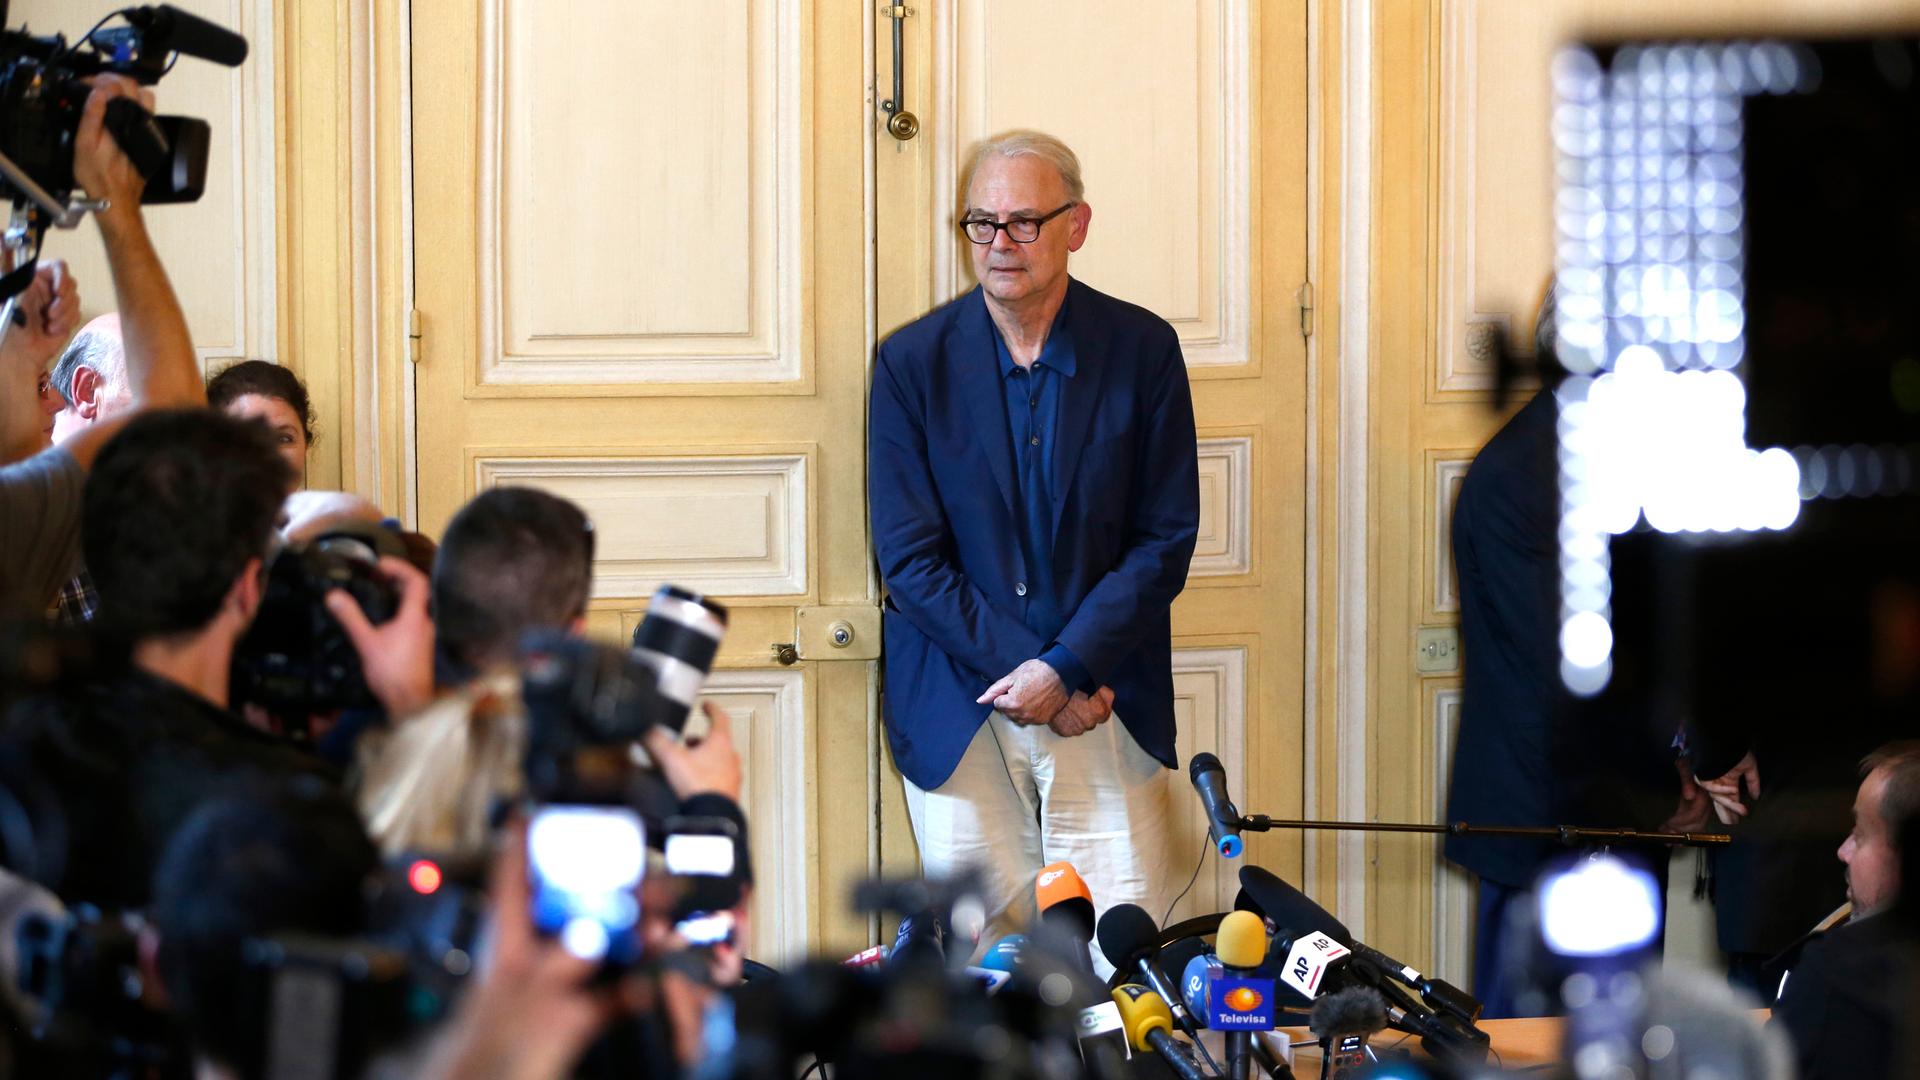 French writer Patrick Modiano poses for journalists in Paris on October 9, 2014, after he was declared the winner of the 2014 Nobel Prize for Literature.